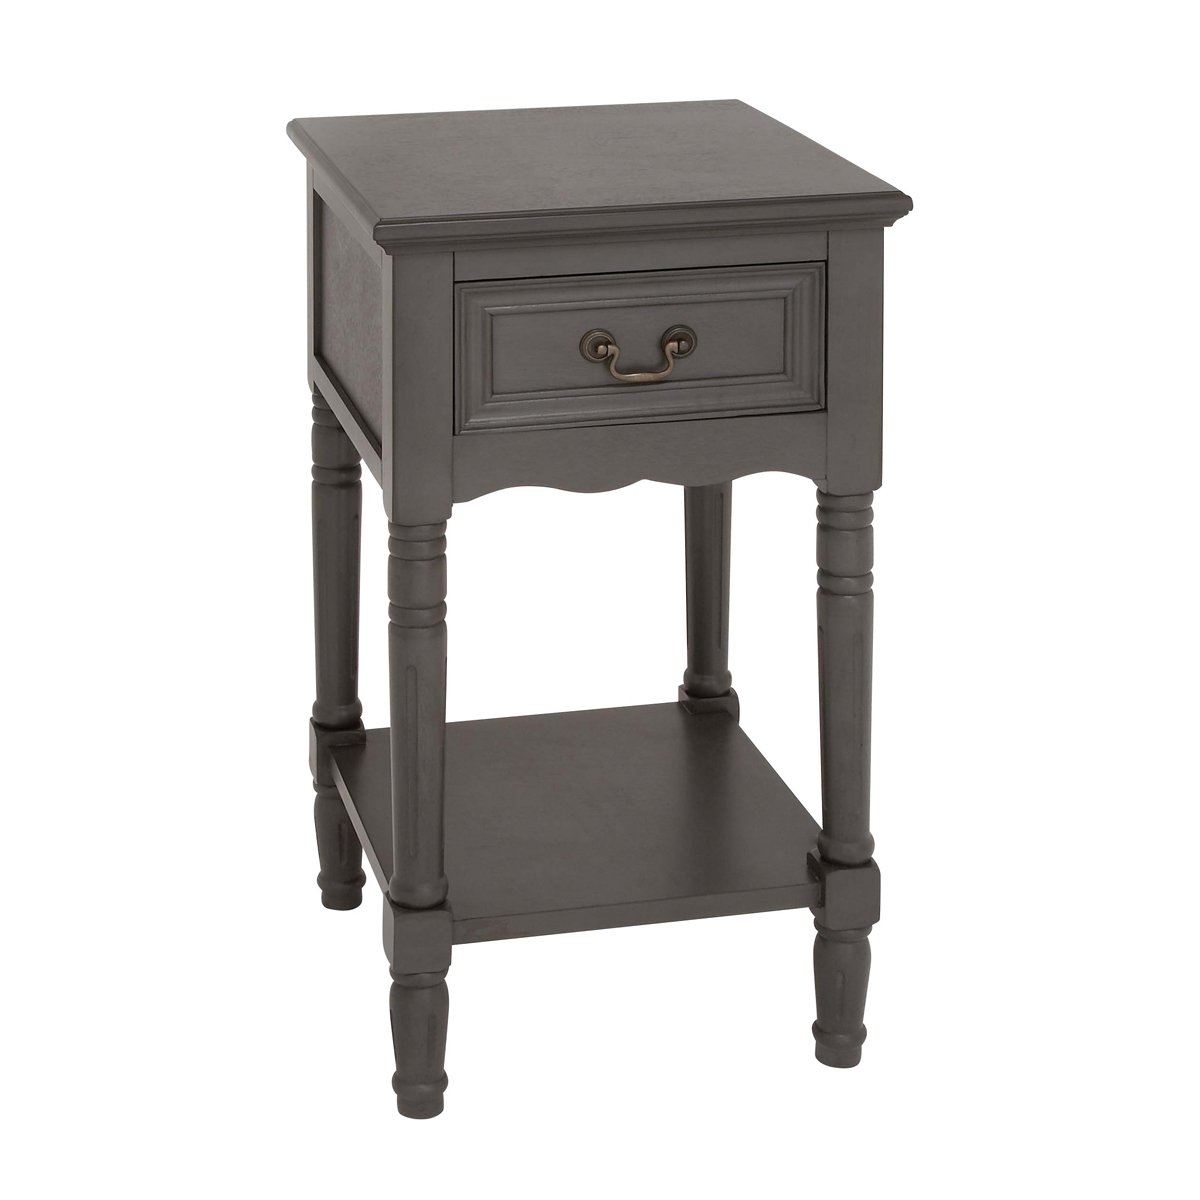 urban designs solid wood night stand table grey accent wine cabinet furniture owings console modern rustic outdoor wicker patio pottery barn dining set mirrored bedside lamps